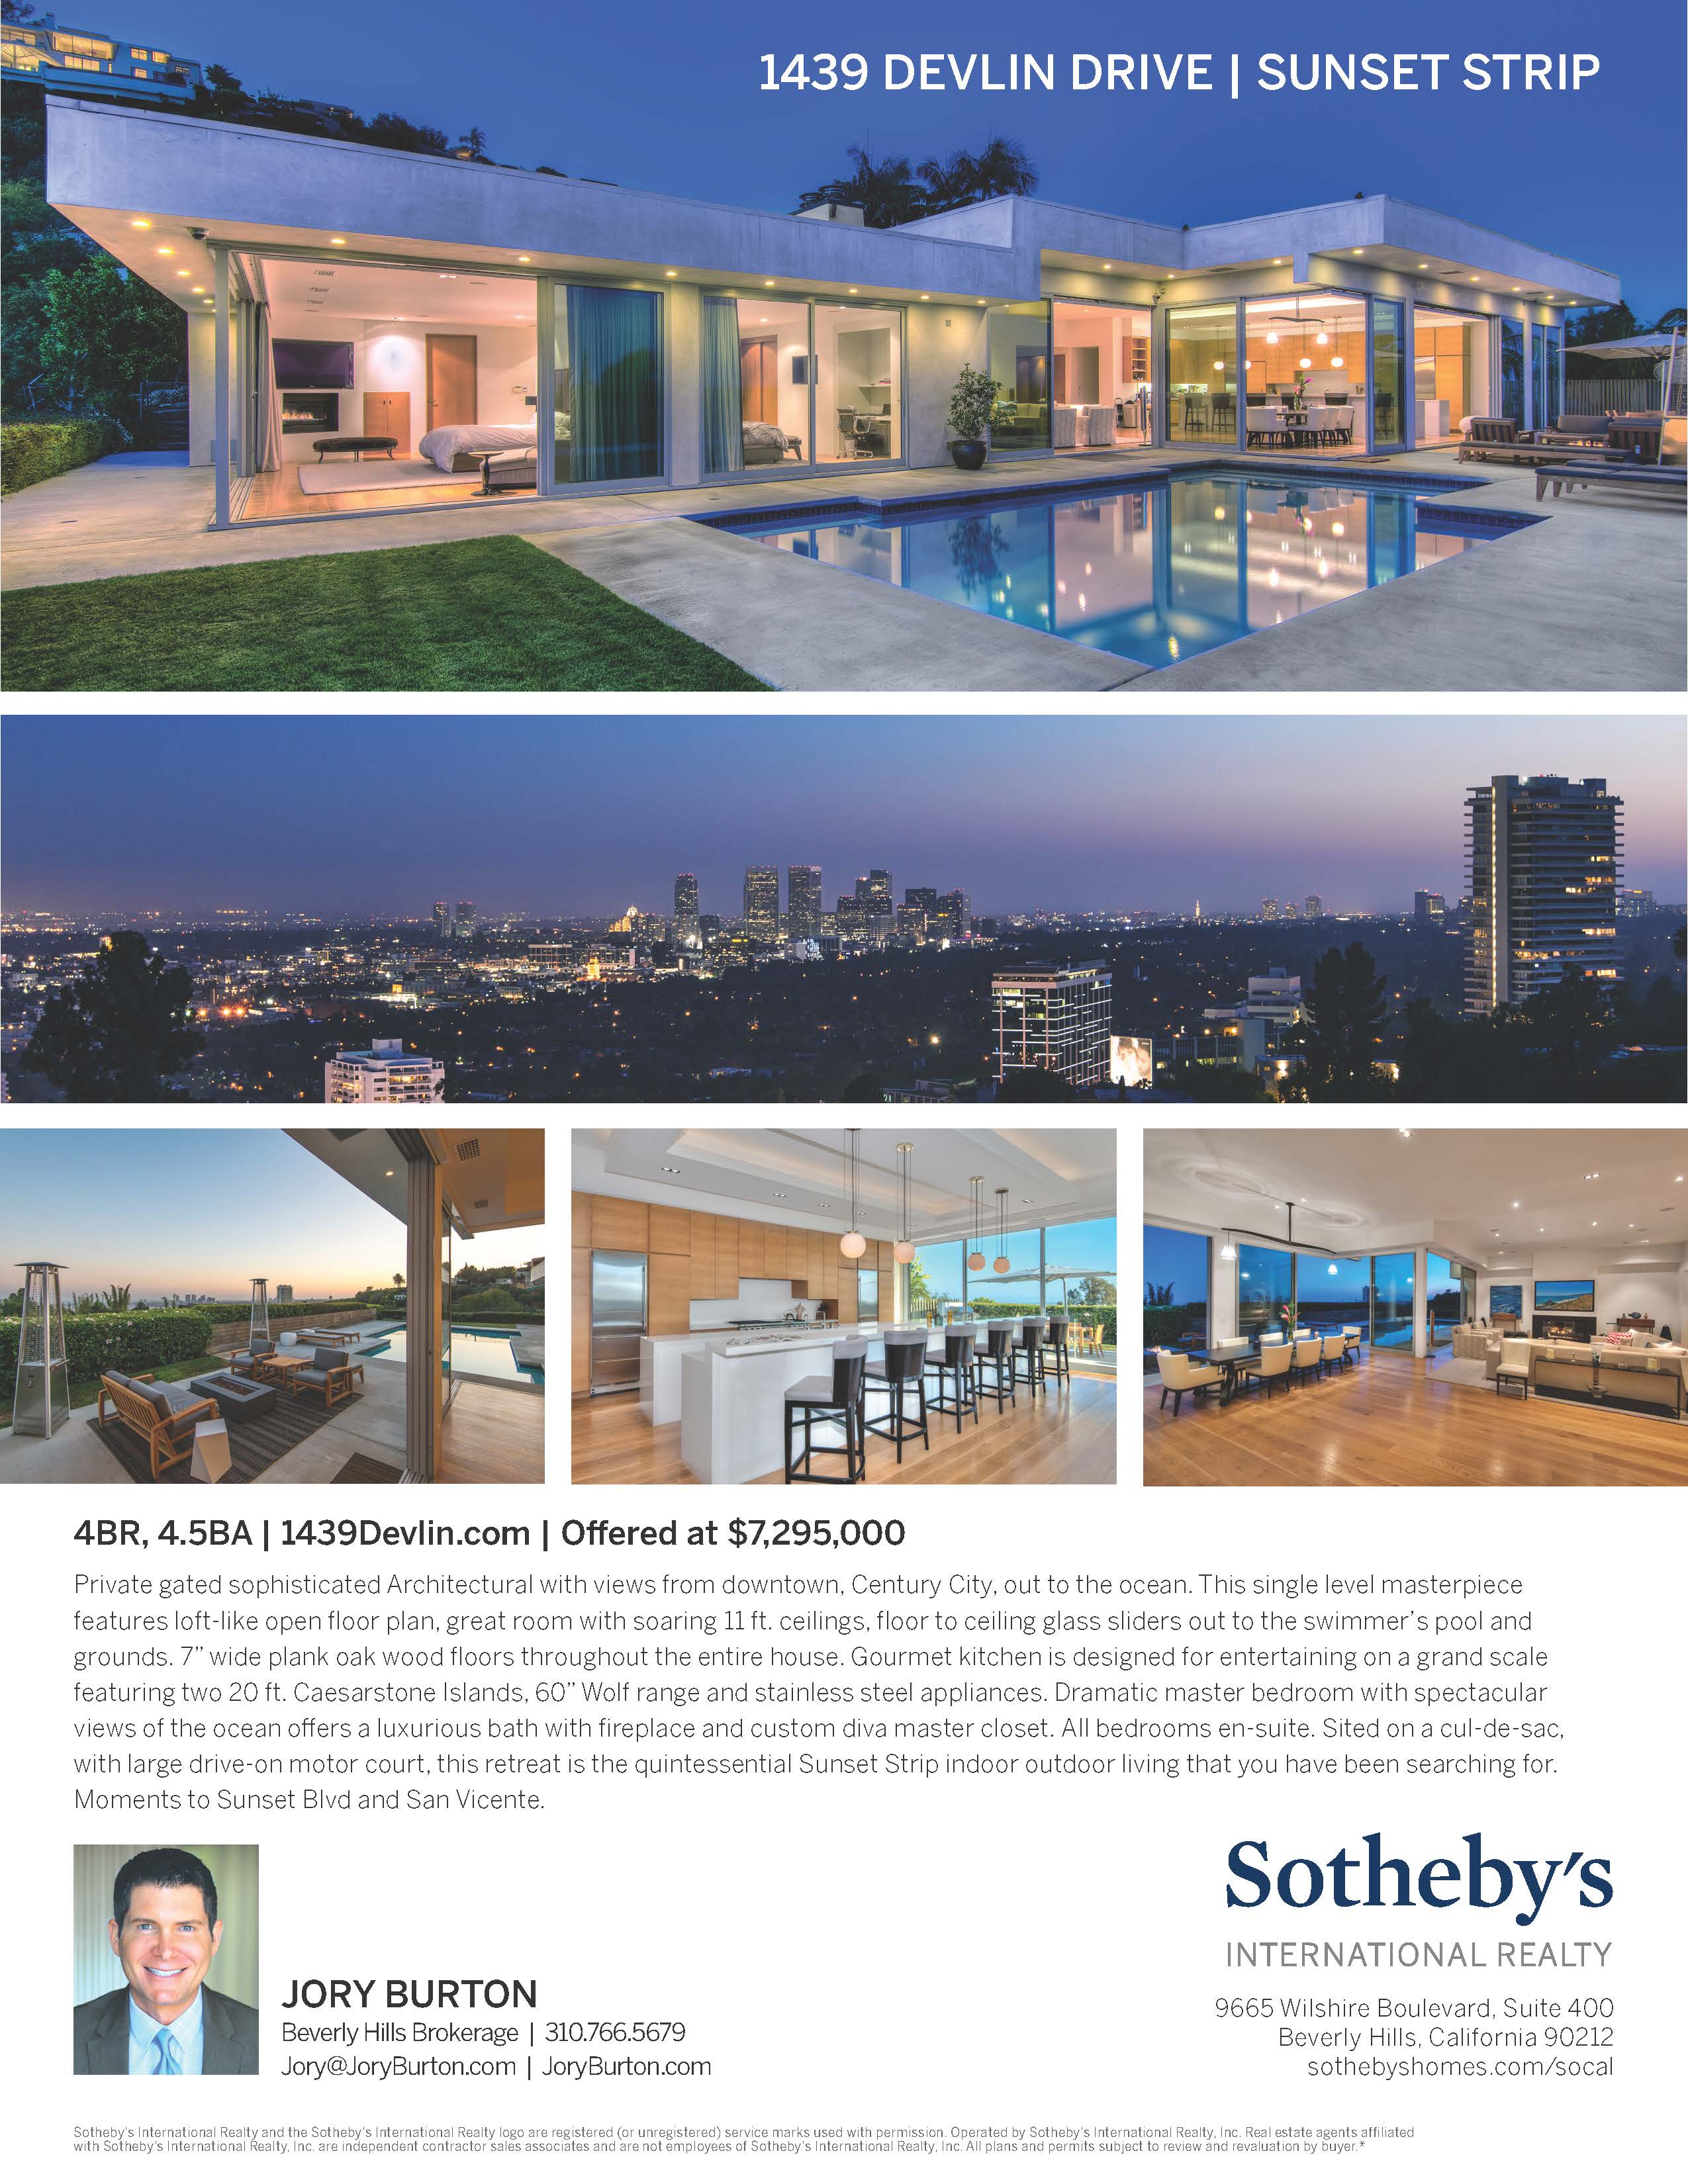 JUST LISTED: Sunset Strip Architectural With Views From Downtown To The Ocean